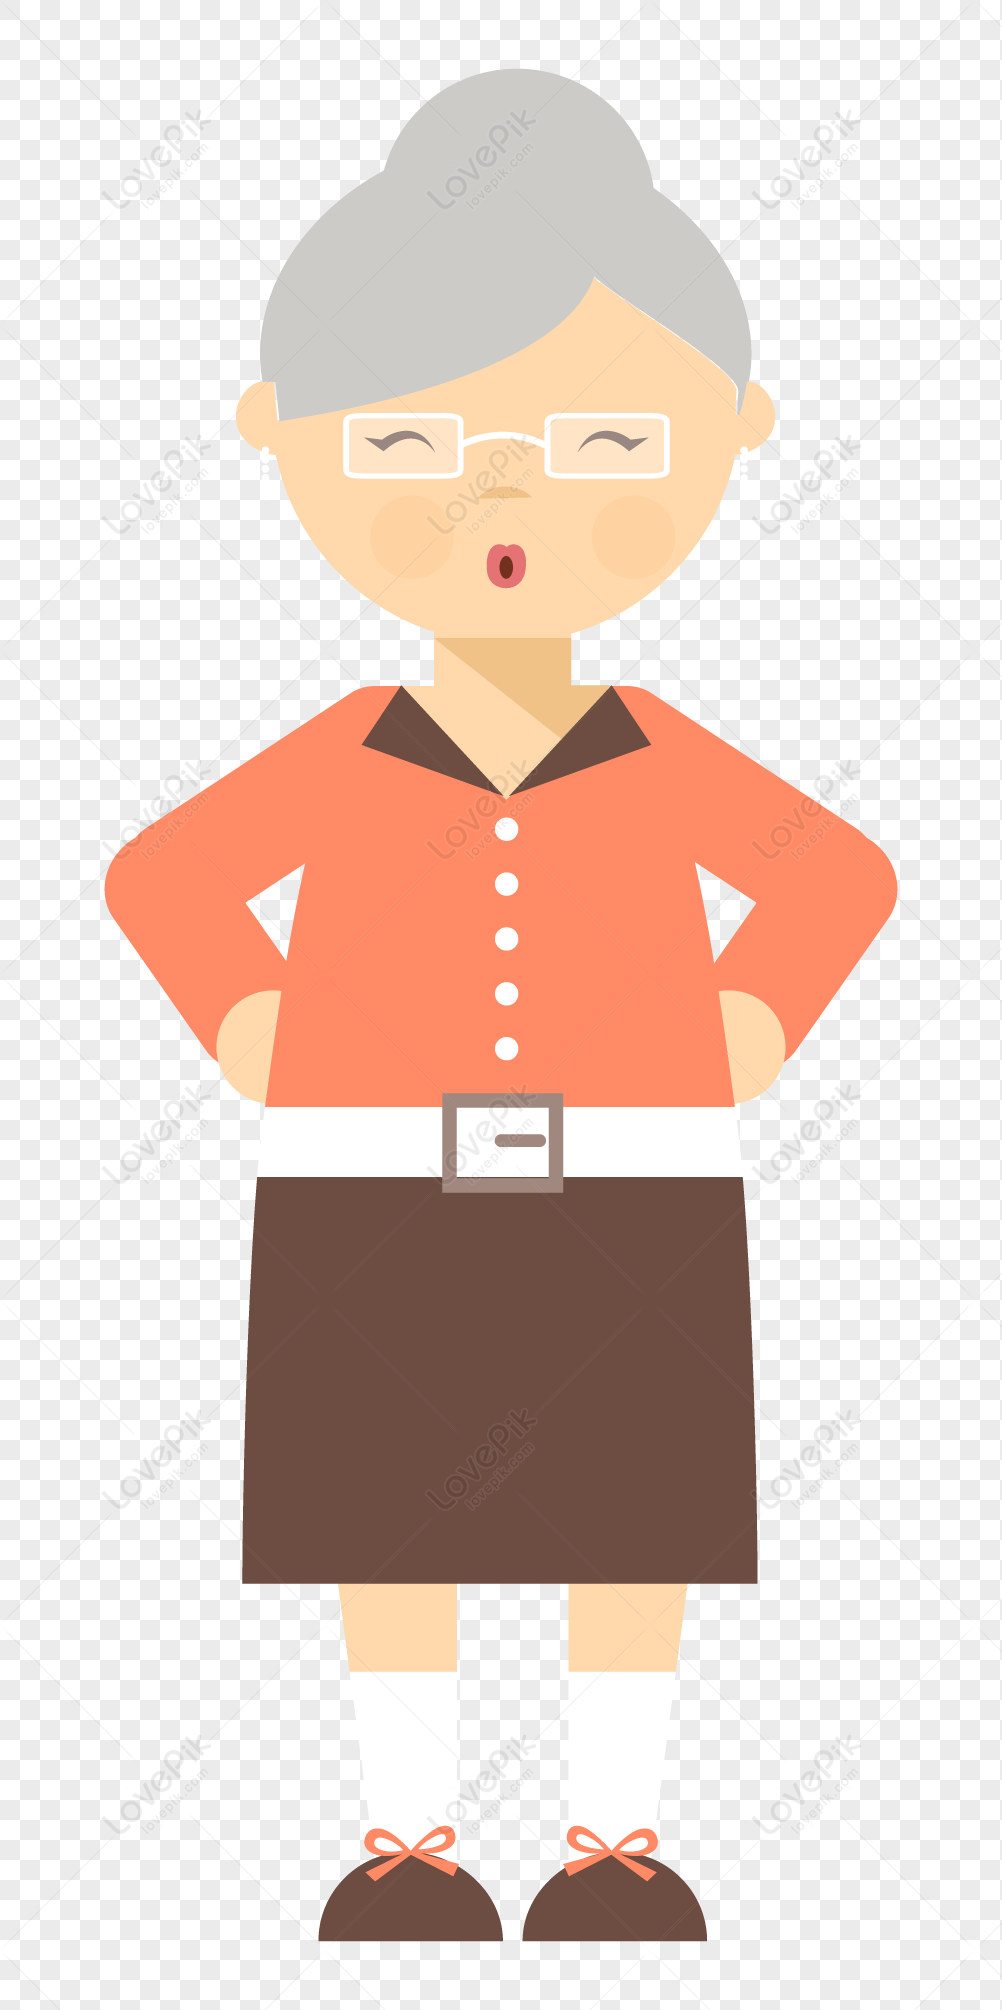 Grandma Who Pinches Her Waist PNG Transparent Background And Clipart Image  For Free Download - Lovepik | 400235040